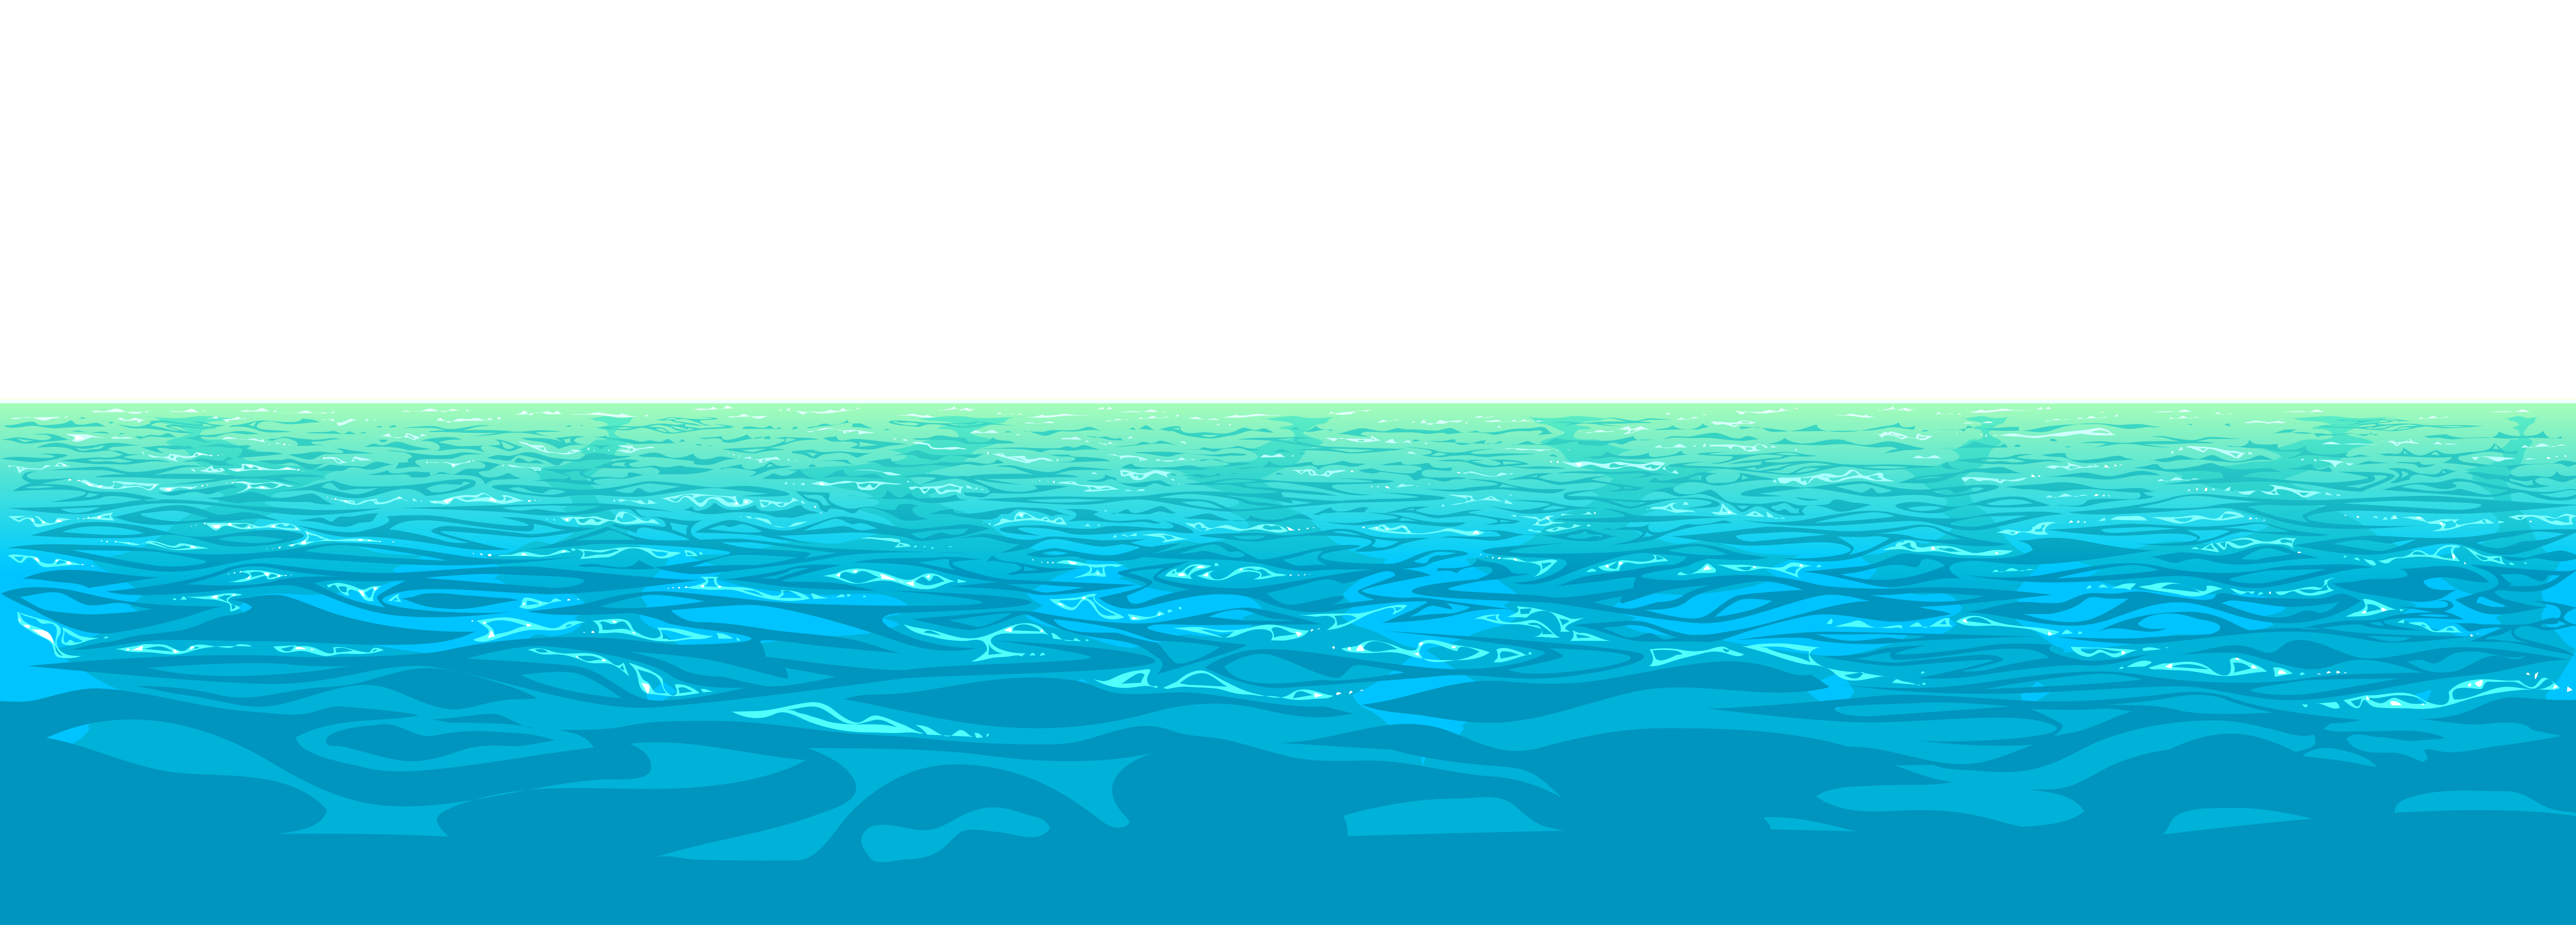 How can I find images of oceans with a transparent background?